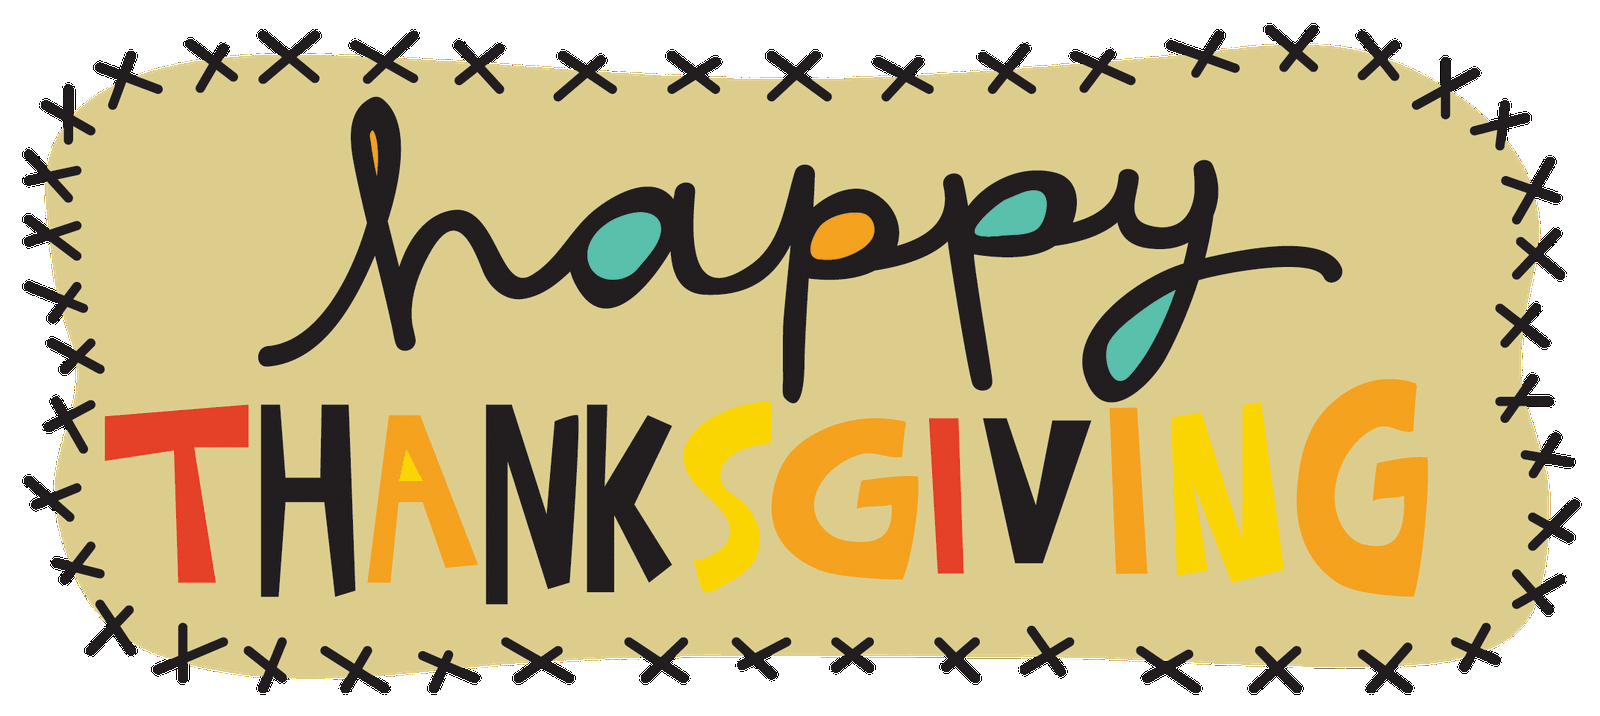 For kids at getdrawings. Clipart friends thanksgiving